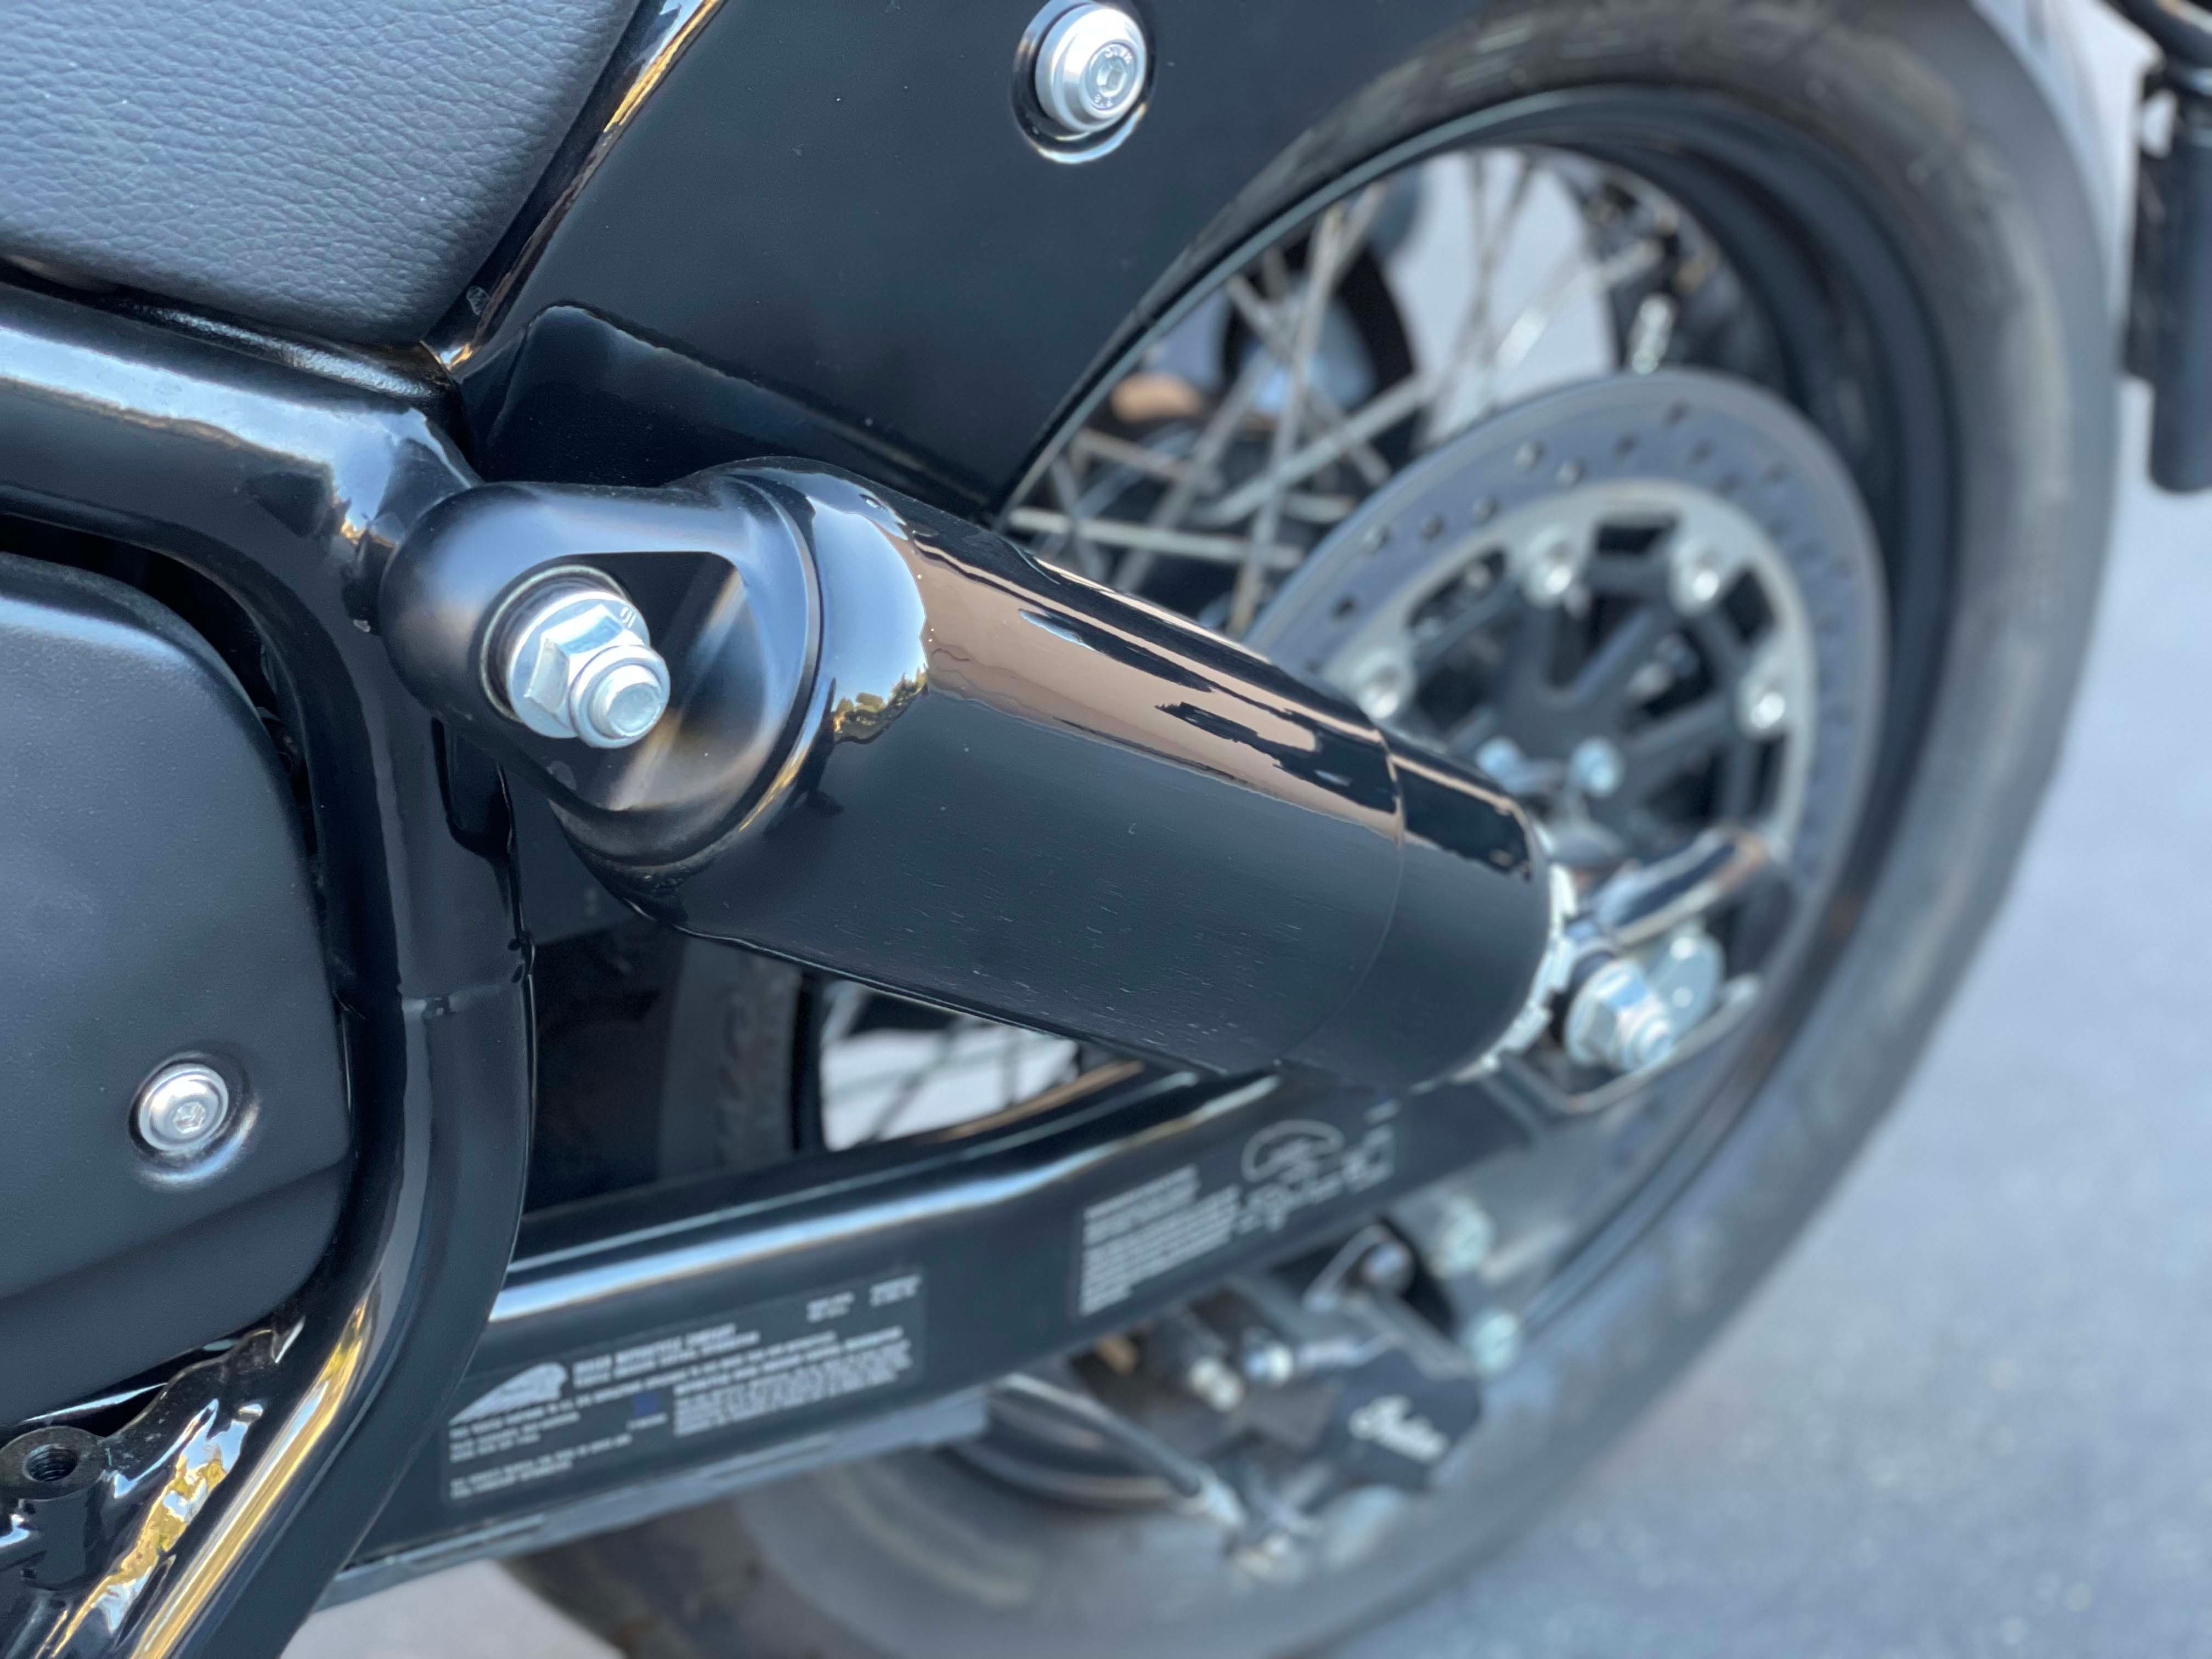 2022 Indian Chief Bobber First Ride Rear Shock